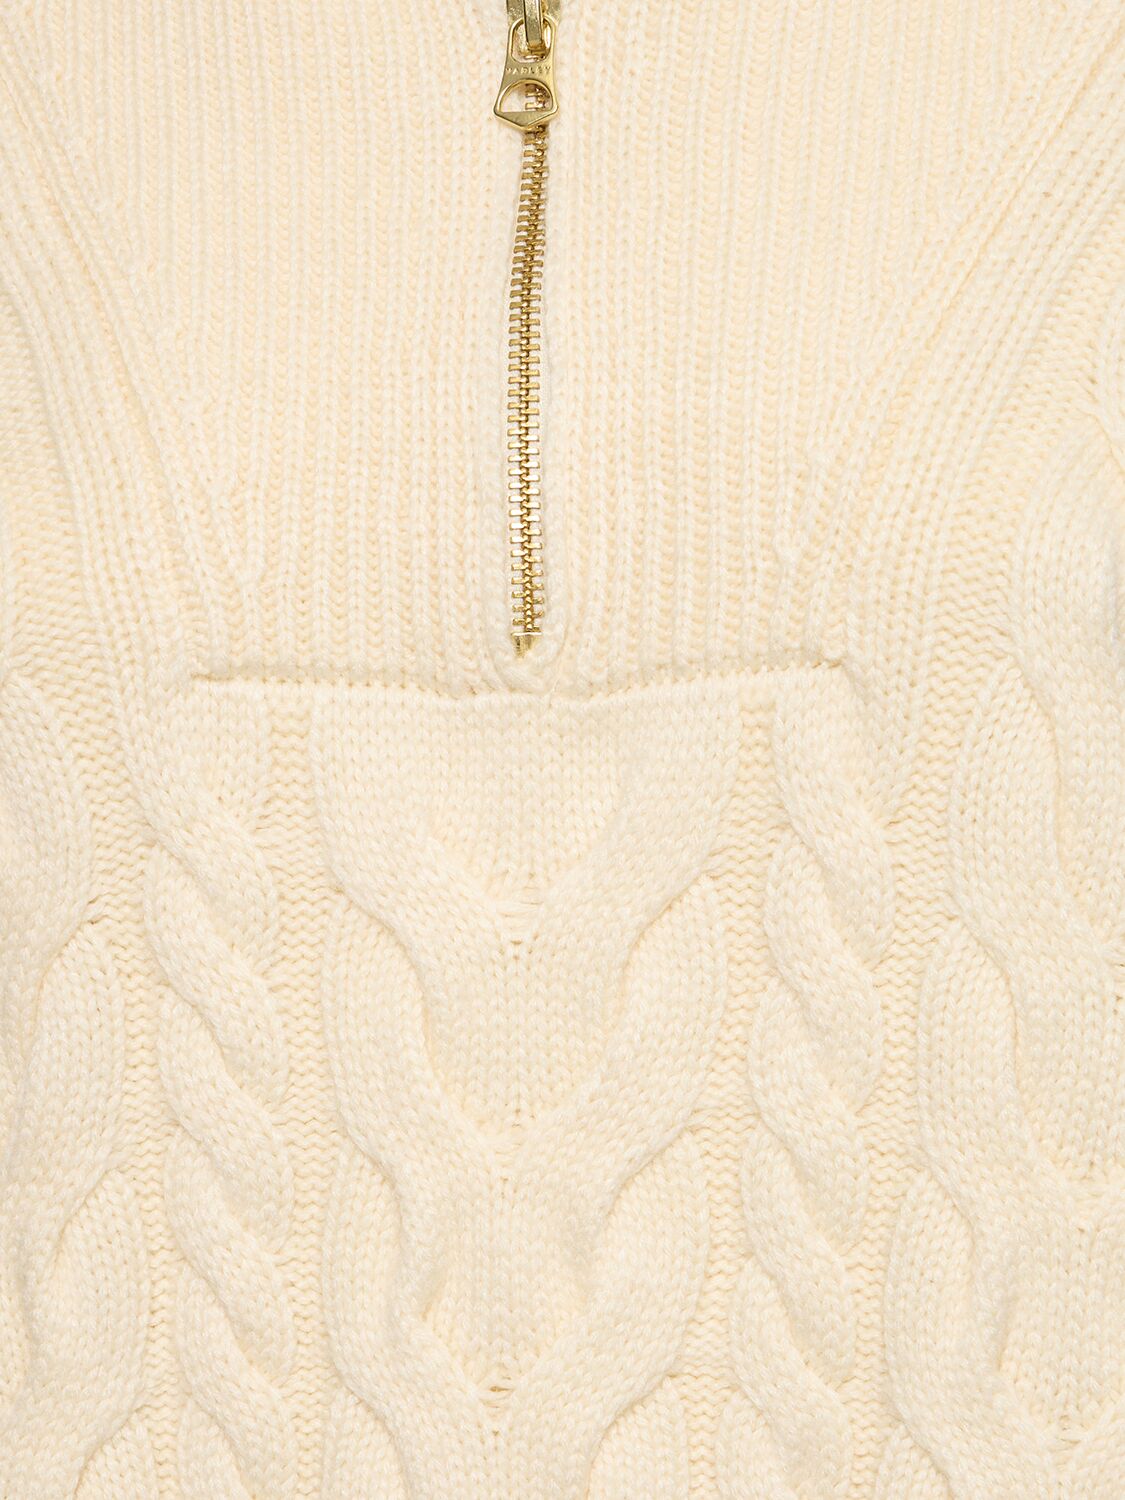 Shop Varley Daria Half Zip Cable Knit Sweater In Beige,white